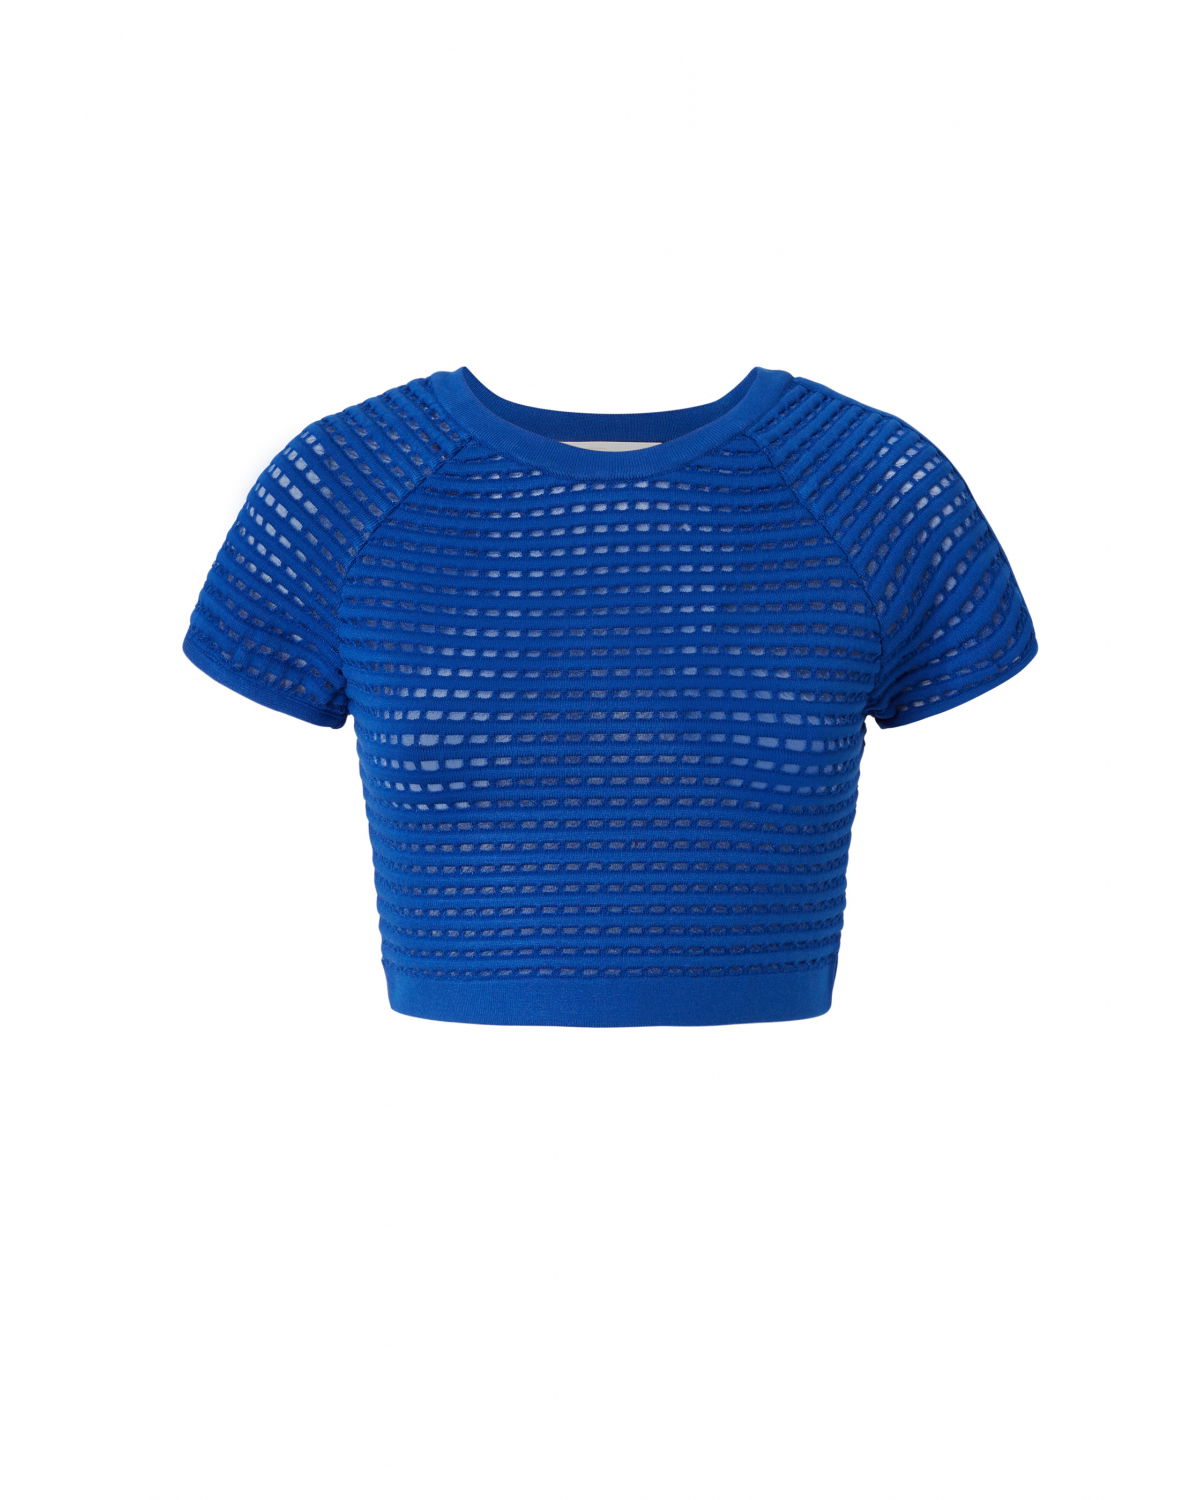 Blue iconic crop top | Iconic Capsule Collection | Genny